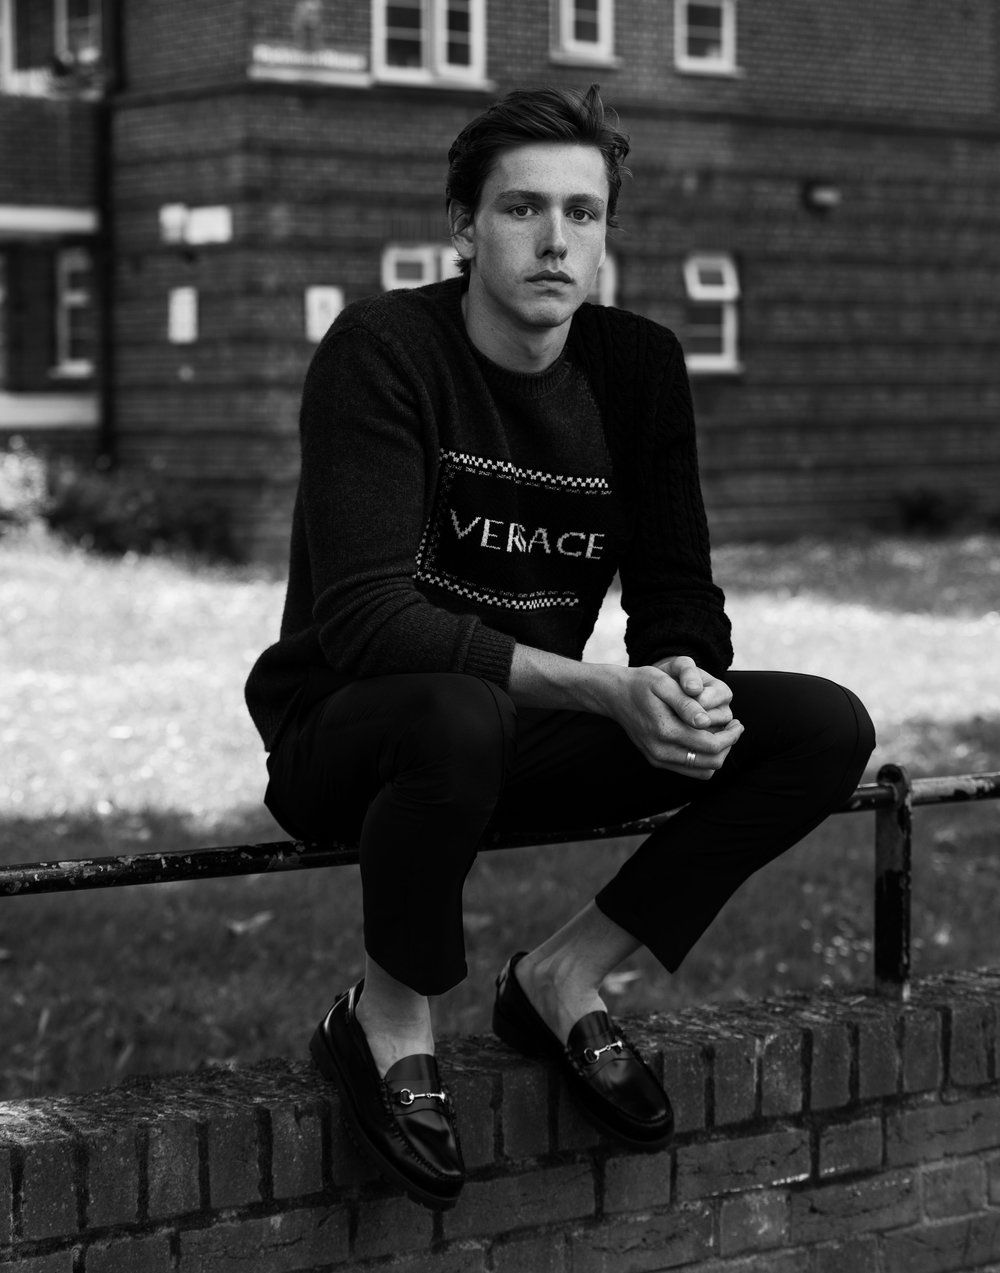 Harris Dickinson by Justin Campbell for Flaunt Magazine Summer 2018. VERSACE sweatshirt, VALENTINO pants, GH BASS shoes